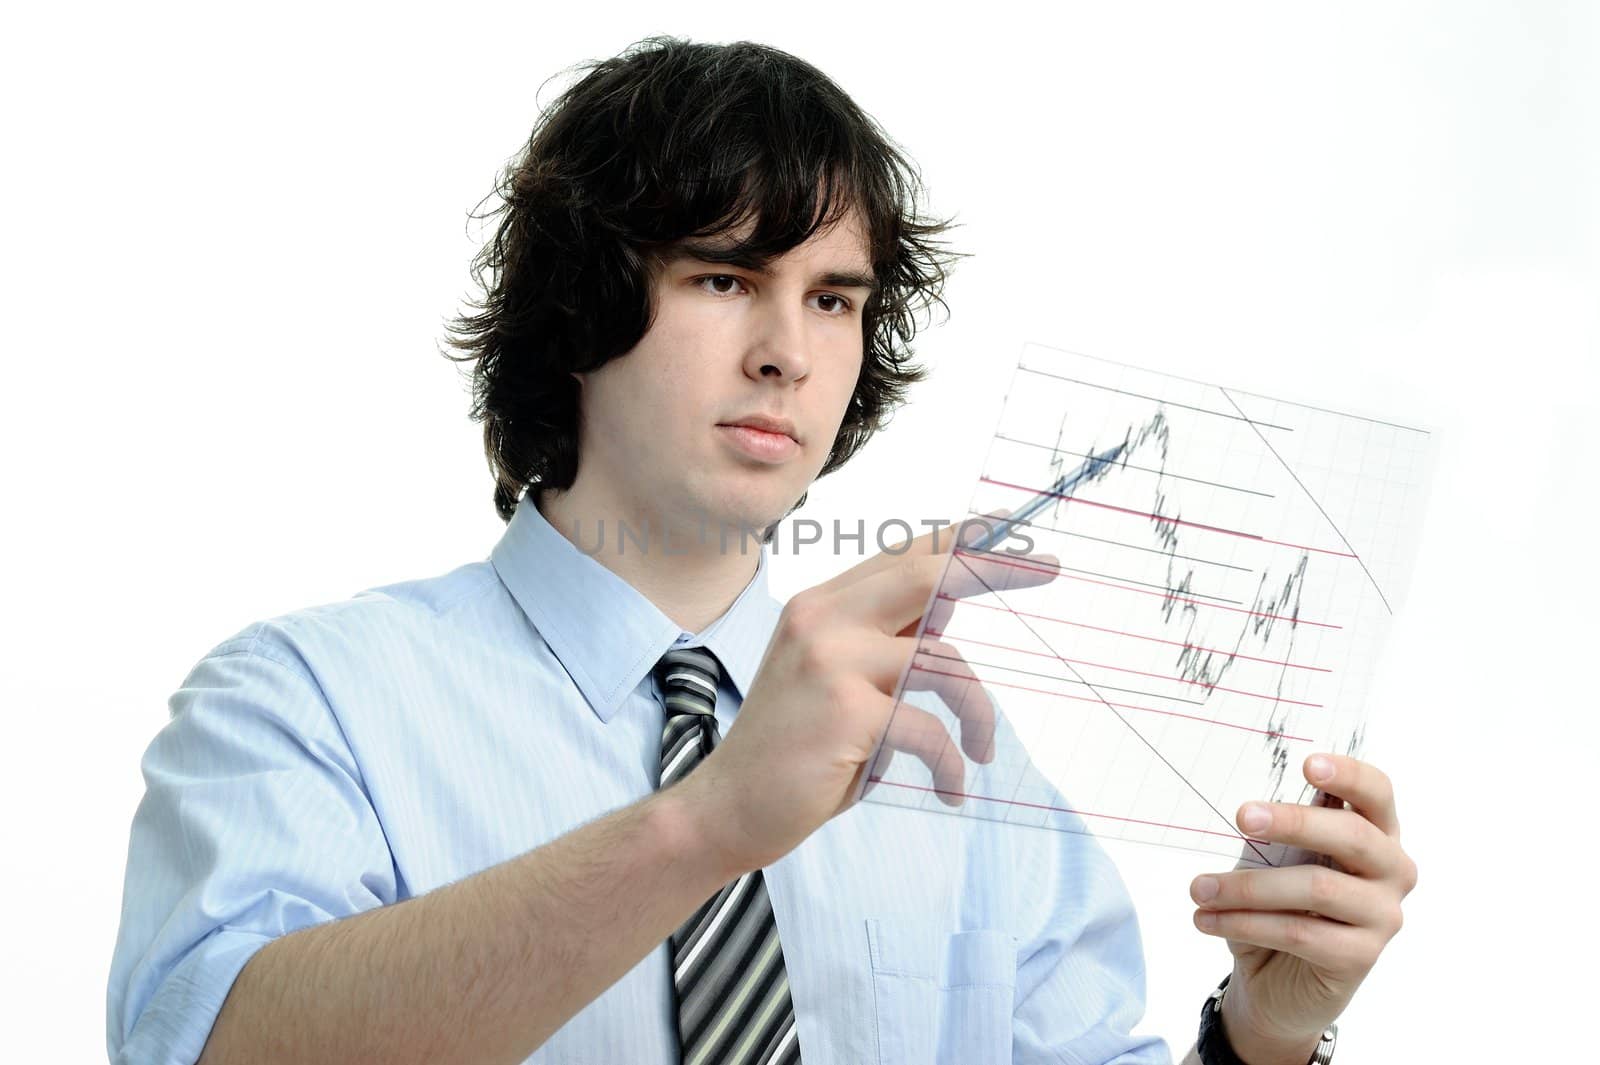 The businessman looks at the chart printed on a transparent material